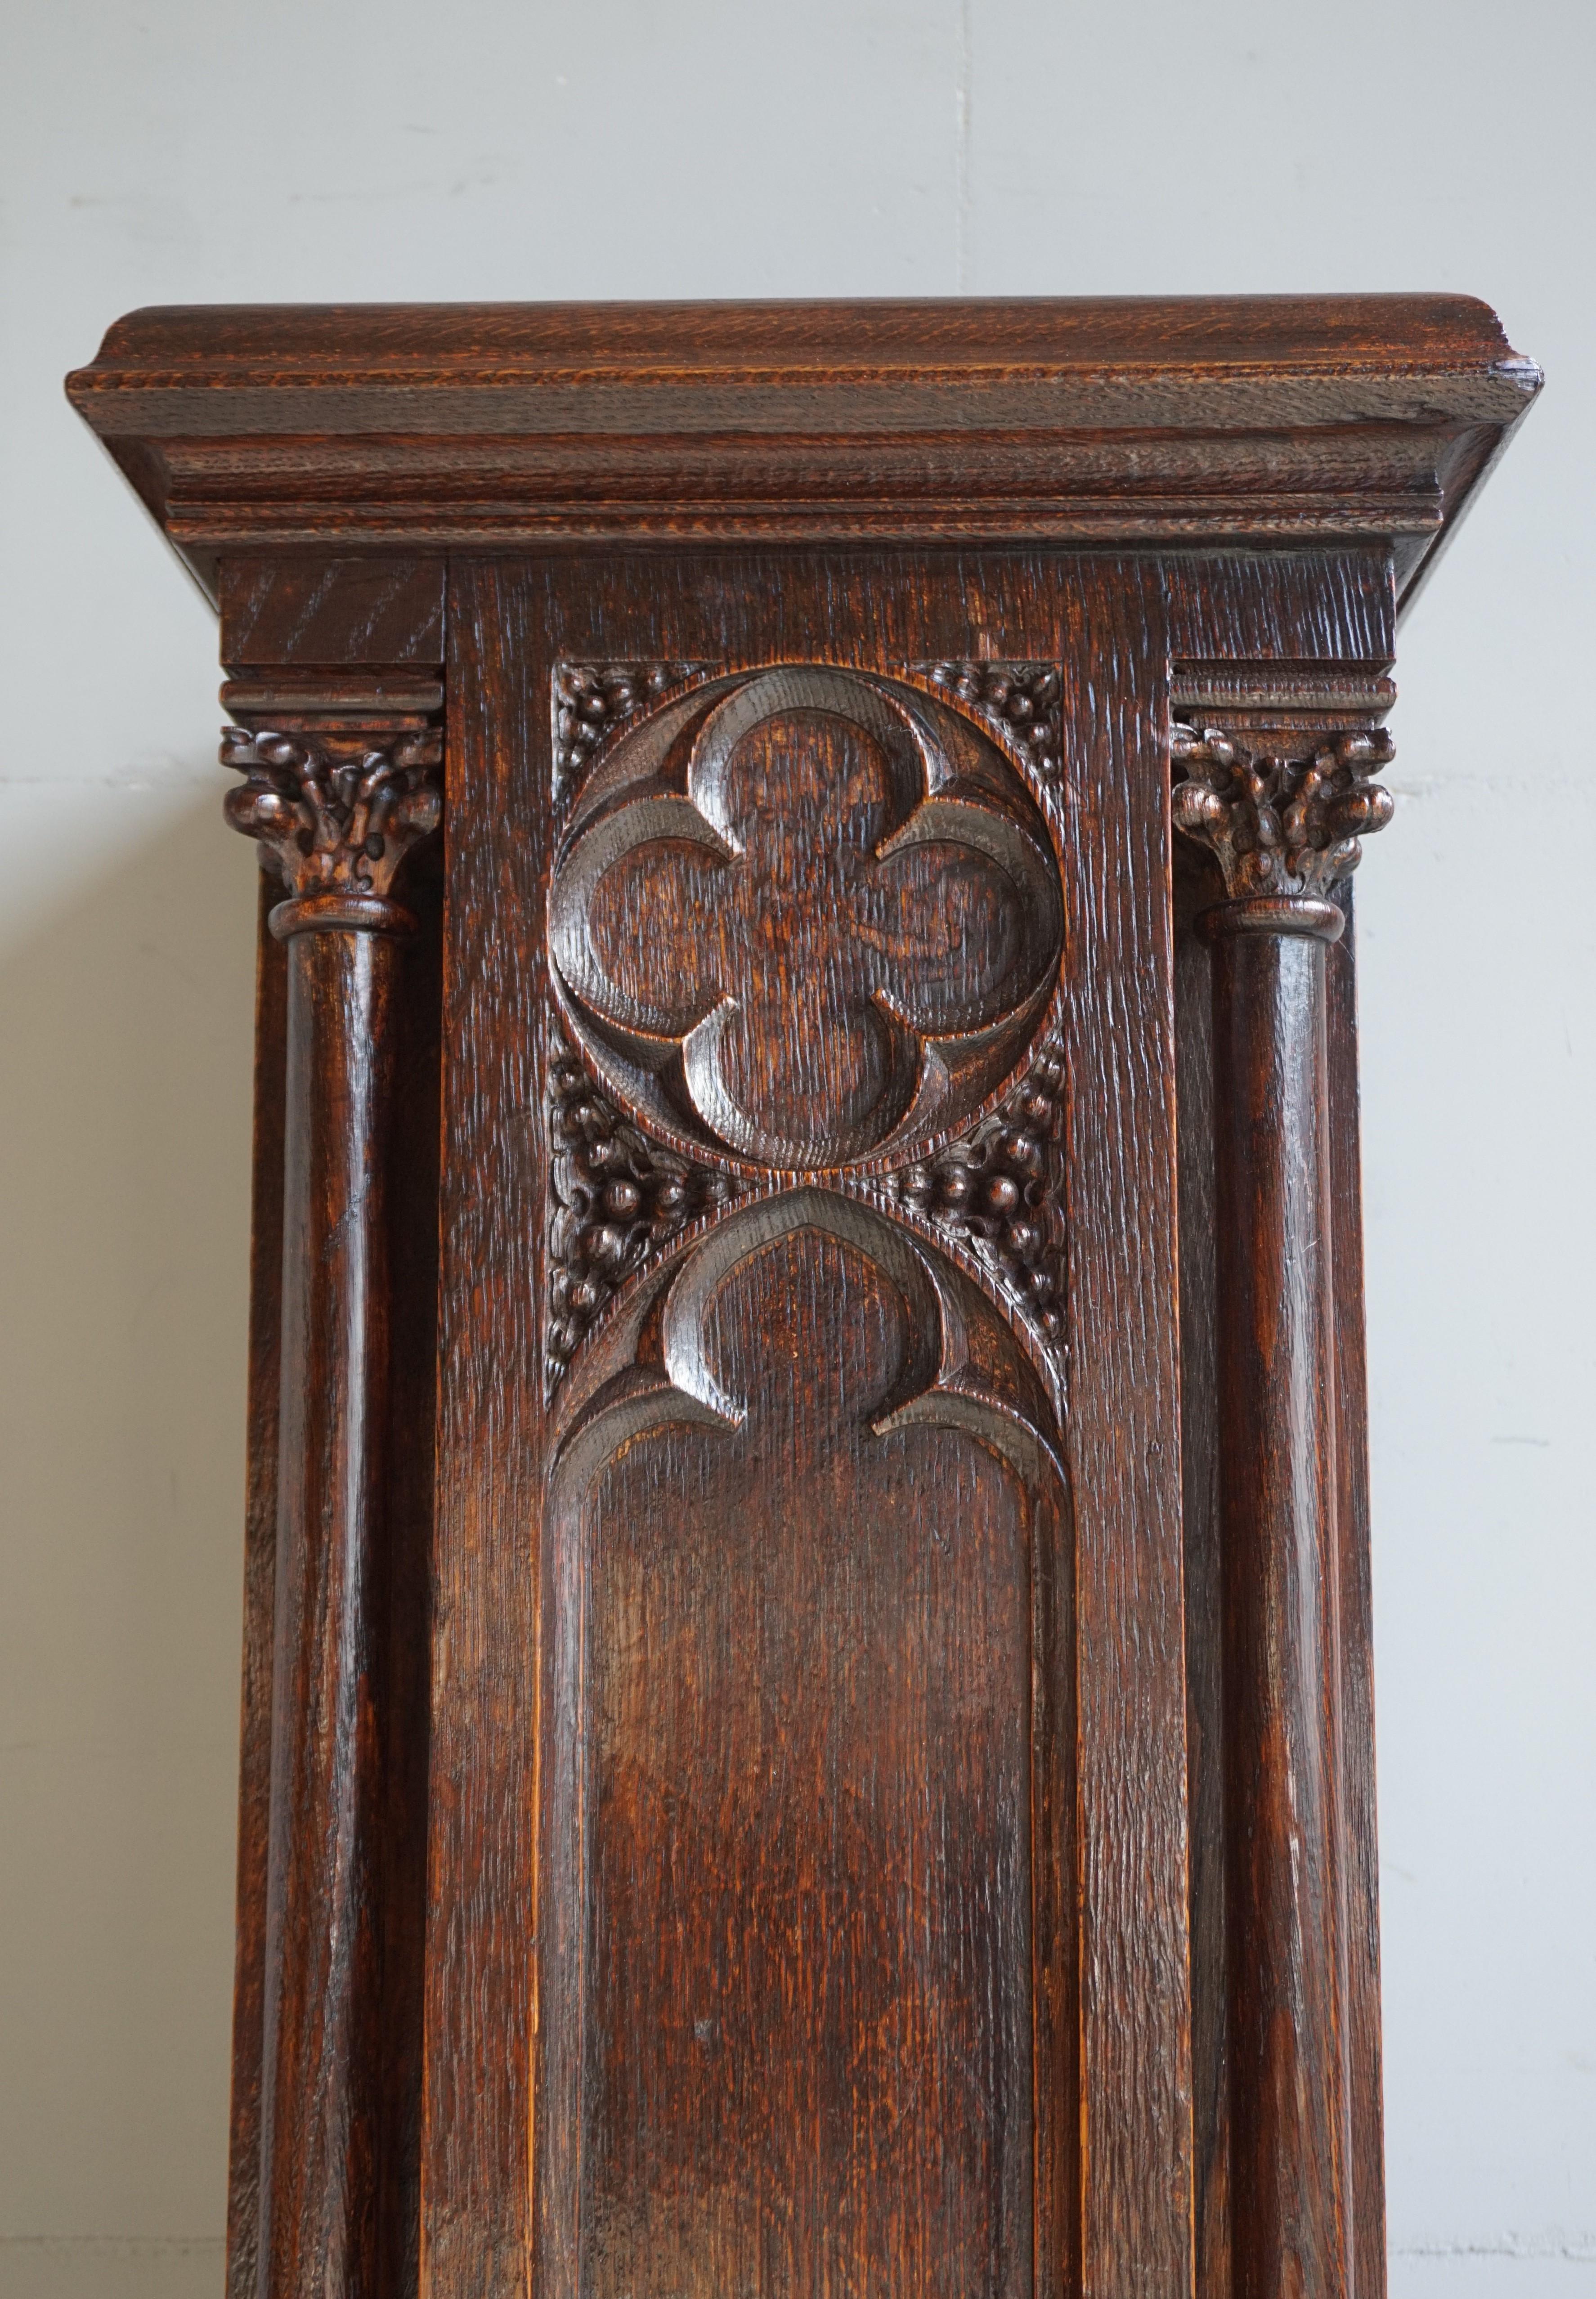 Hand-Crafted Antique and Large, Hand Carved Oak Gothic Revival Church Column Pedestal Stand